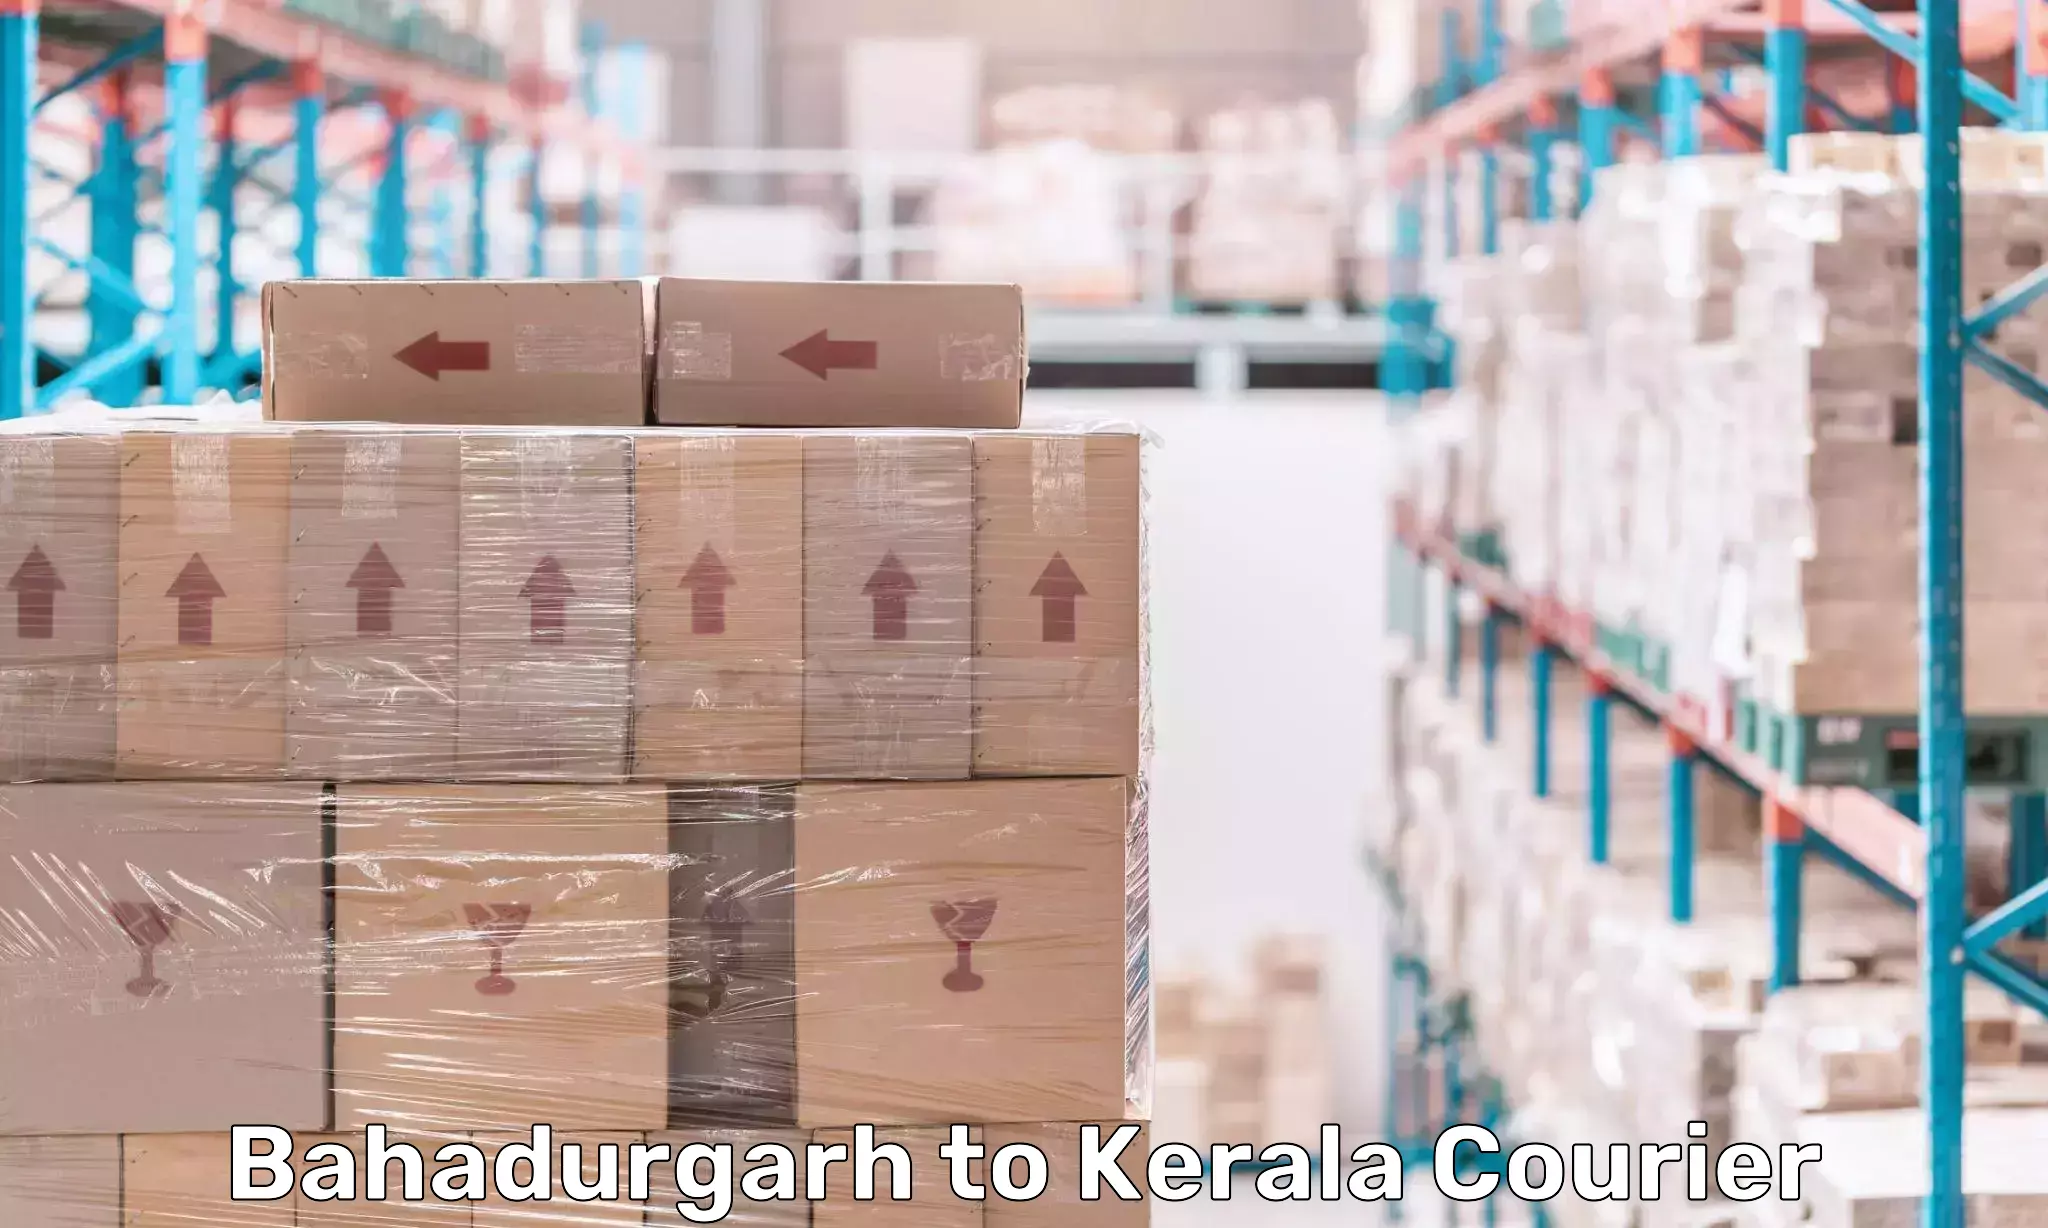 State-of-the-art courier technology Bahadurgarh to Kerala